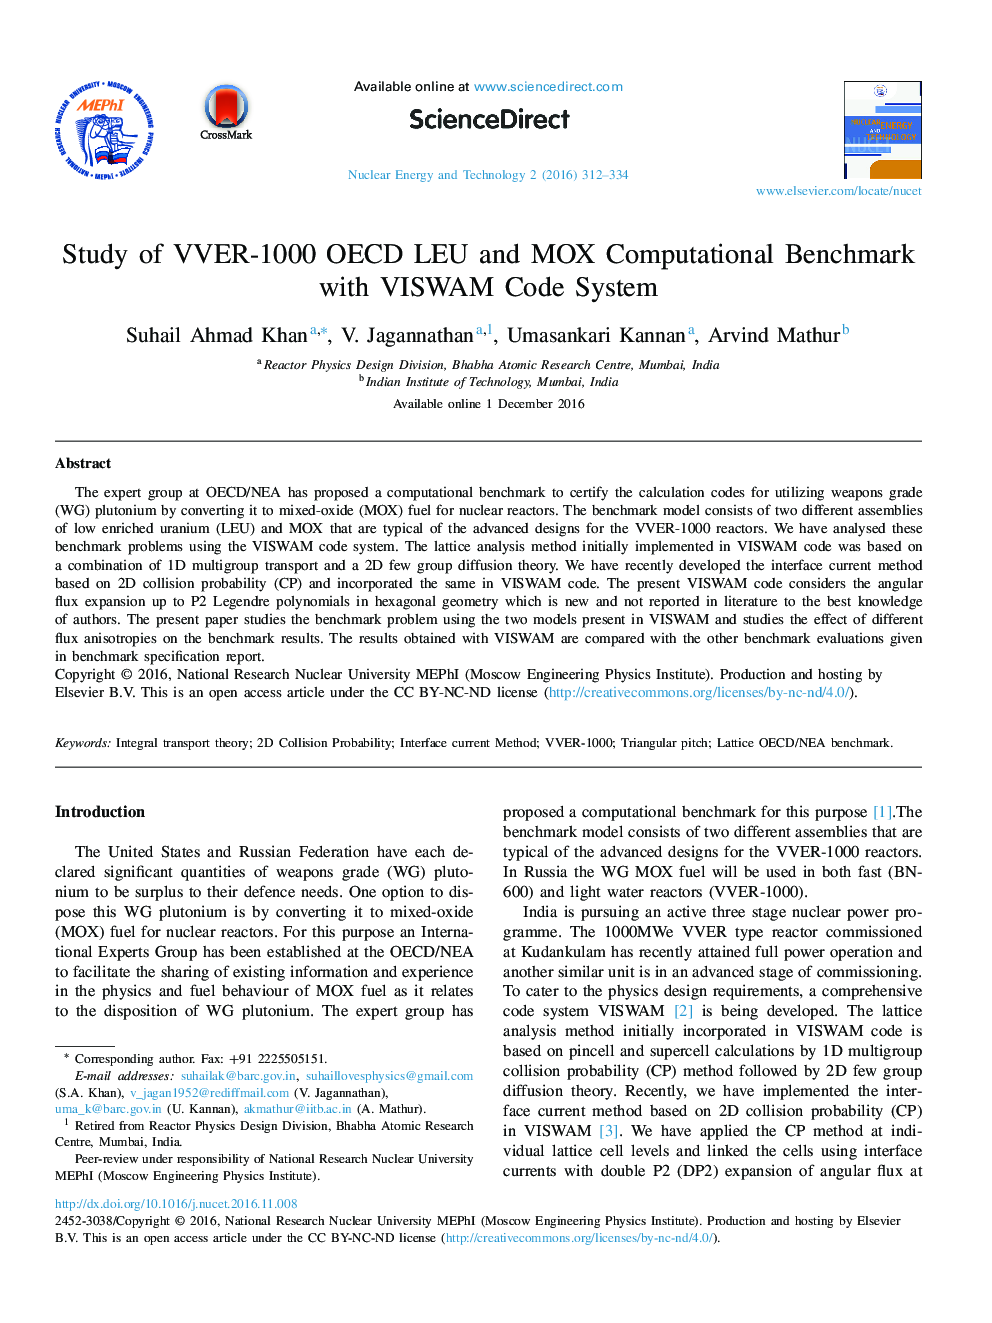 Study of VVER-1000 OECD LEU and MOX Computational Benchmark with VISWAM Code System